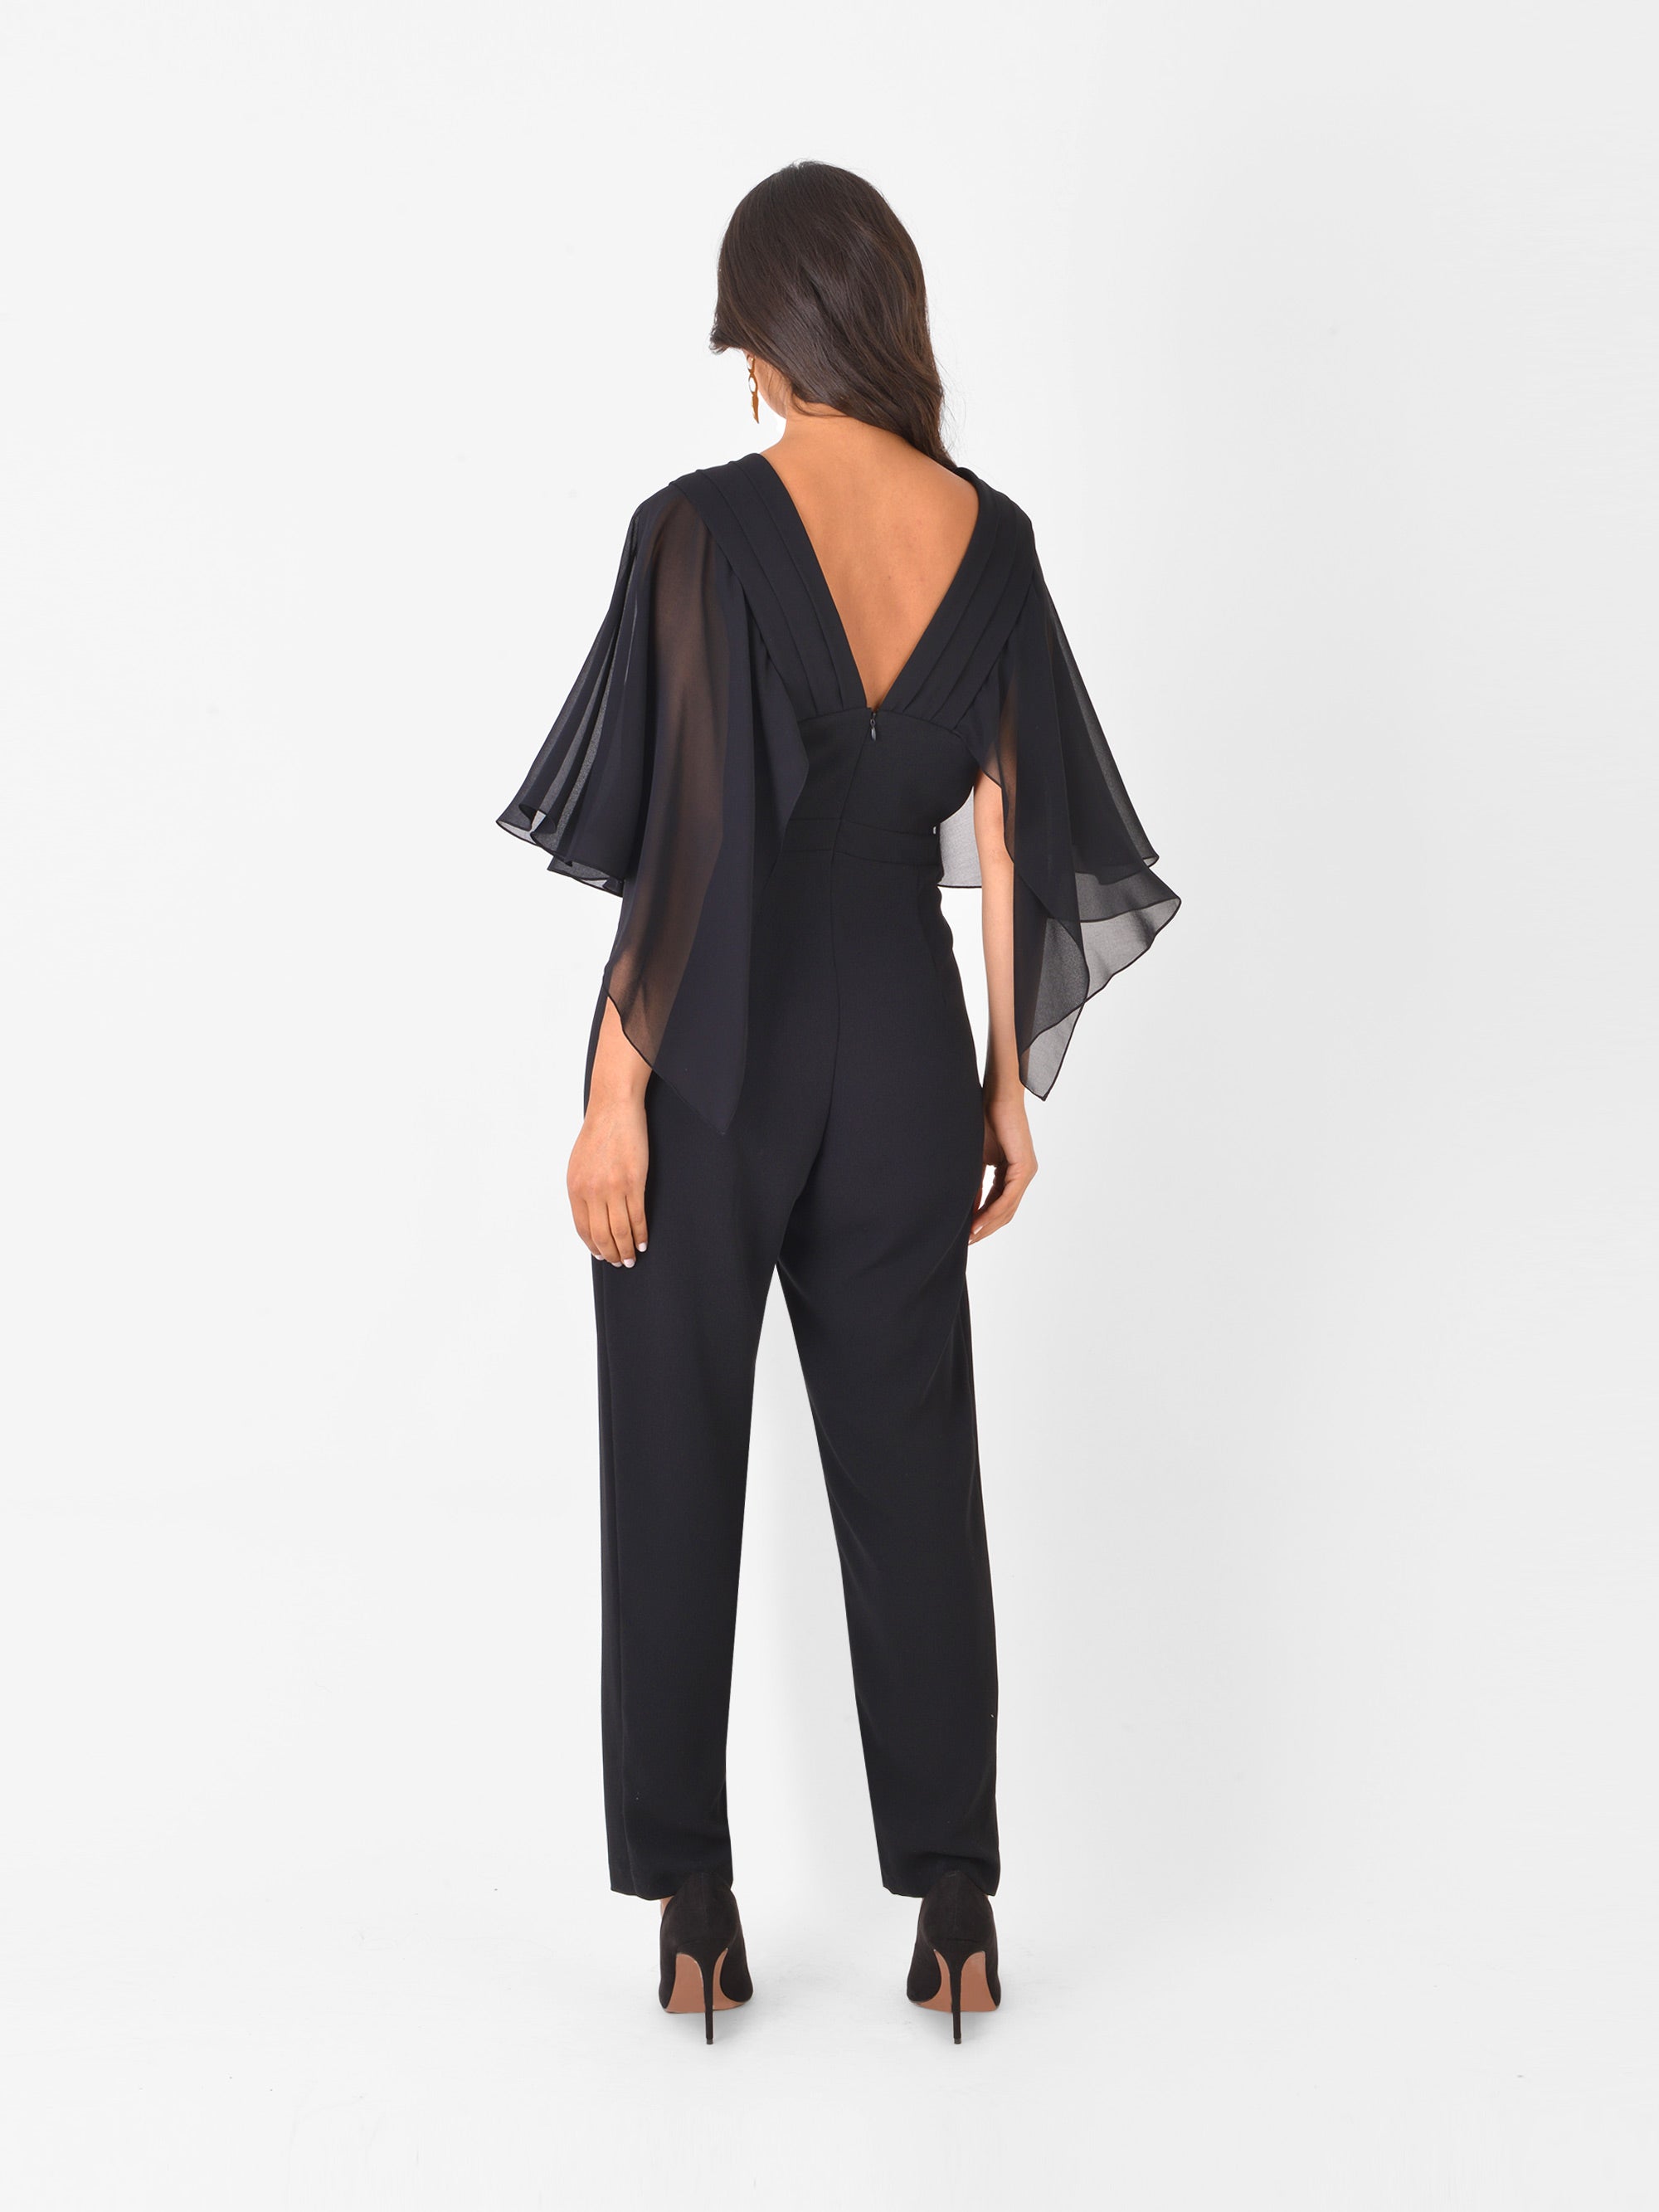 Buy Green & Black Jumpsuits &Playsuits for Women by DODO & MOA Online |  Ajio.com